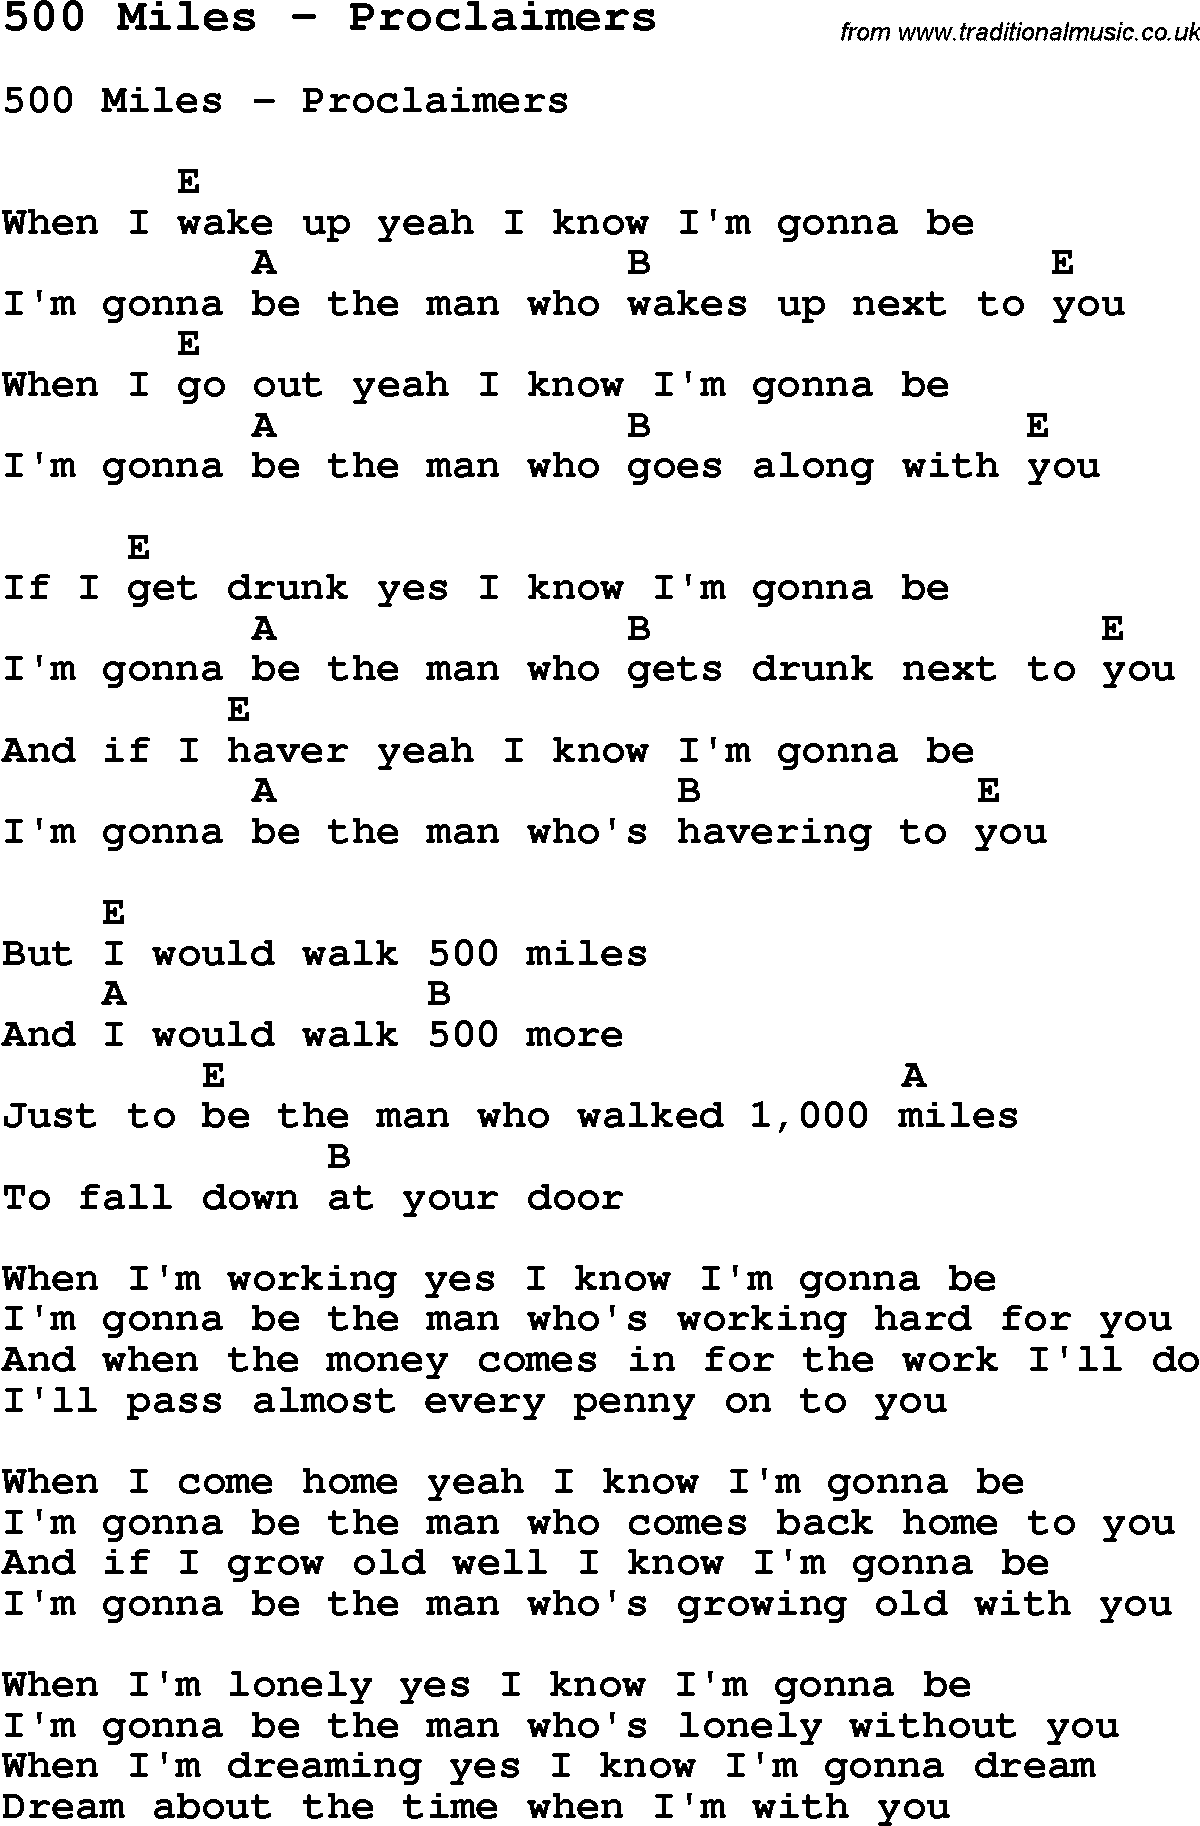 Song 500 Miles by Proclaimers, with lyrics for vocal performance and accompaniment chords for Ukulele, Guitar Banjo etc.